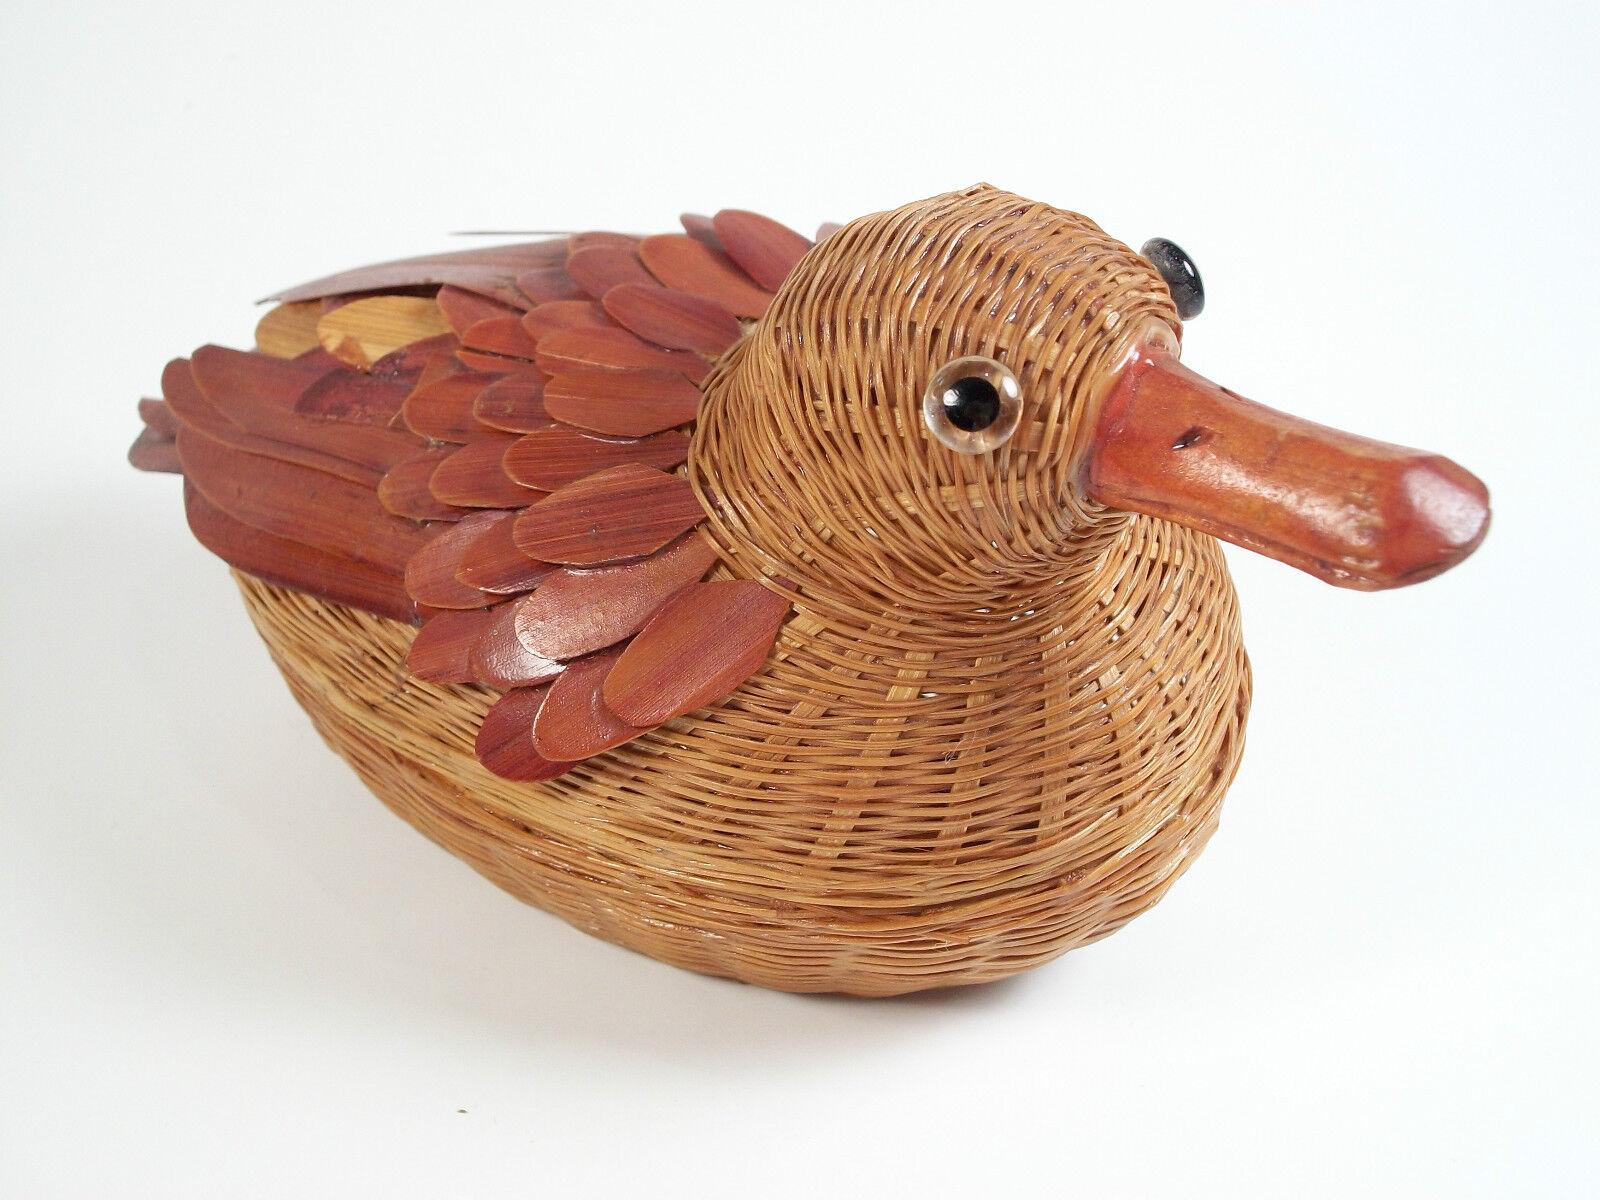 Asian Pair of Vintage Bird Form Lidded Baskets - Finely Woven - Late 20th Century For Sale